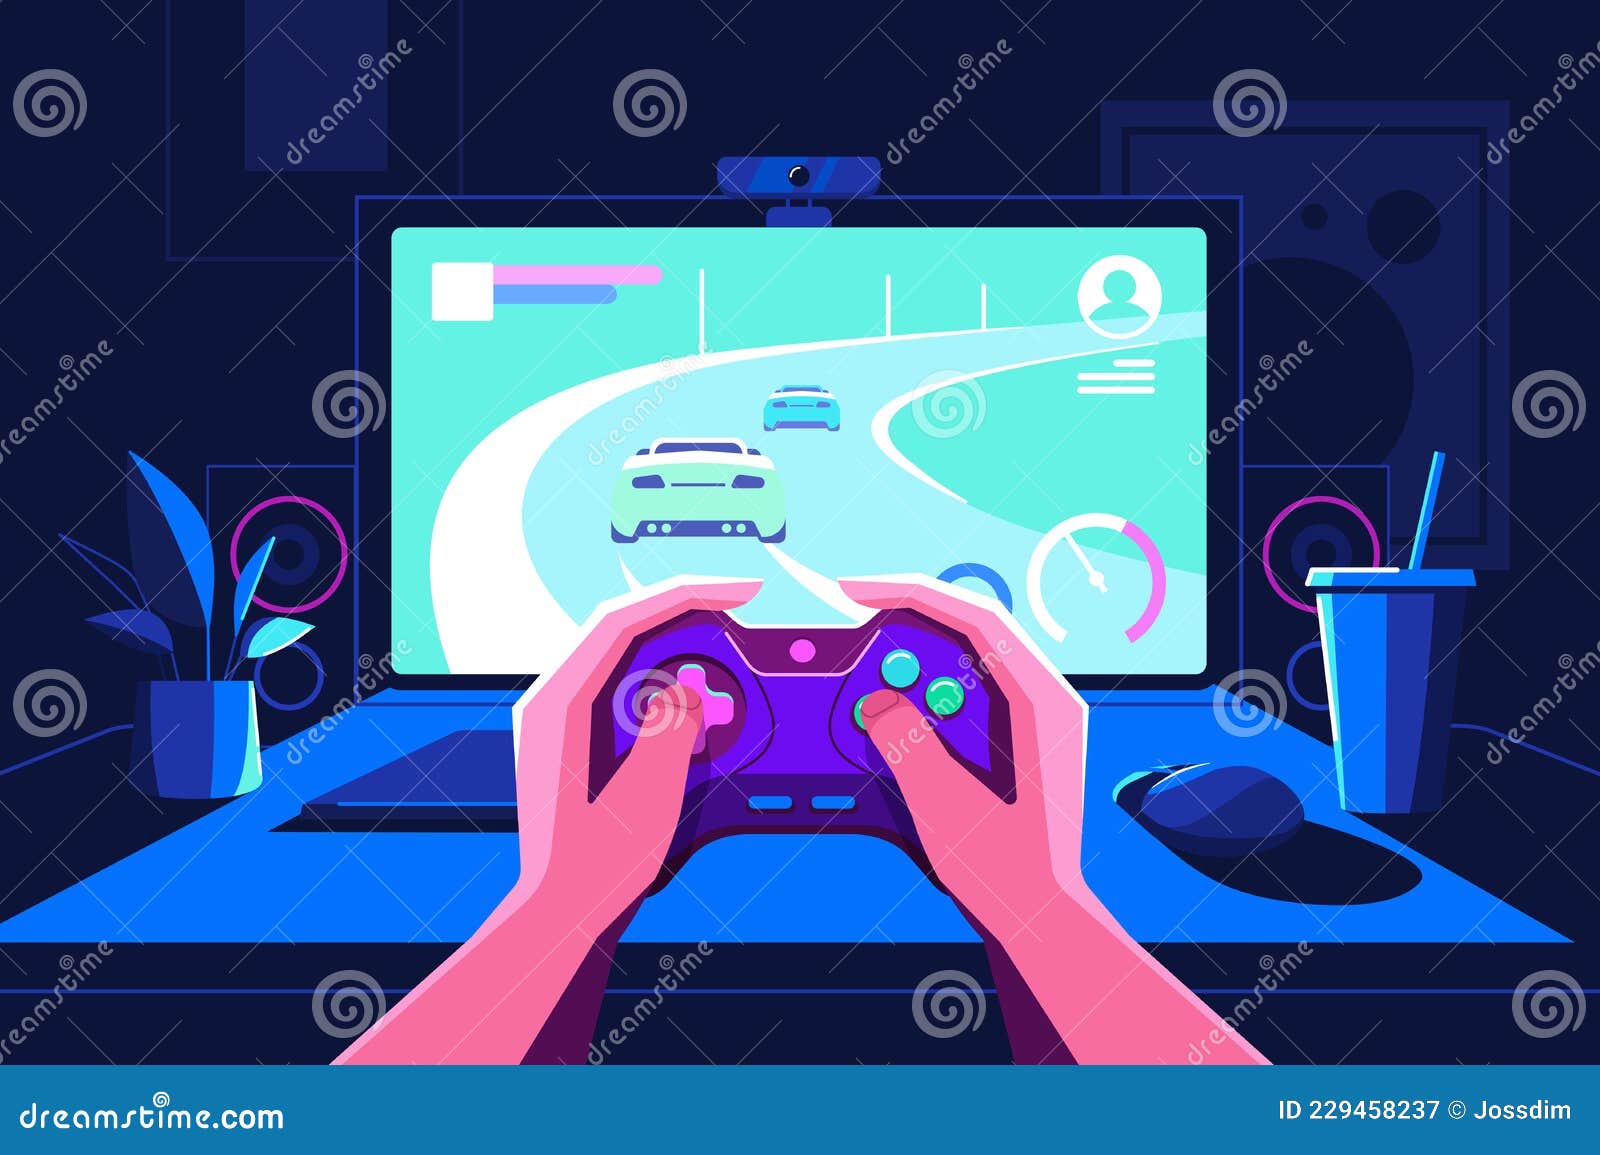 gamer hands holding console in front of screen